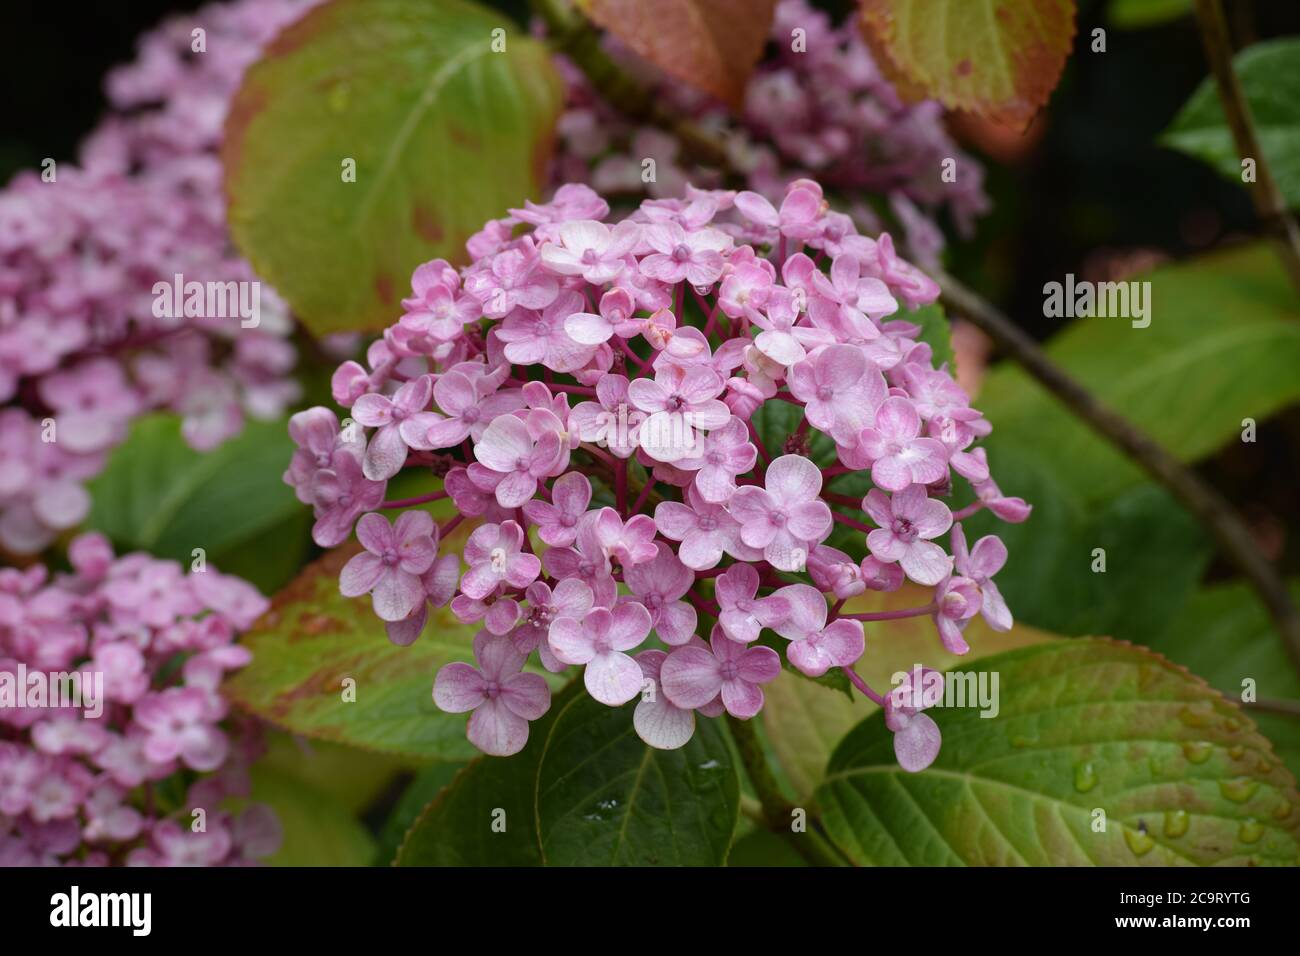 Pink hydregna in a garden in Ireland after the rain Stock Photo